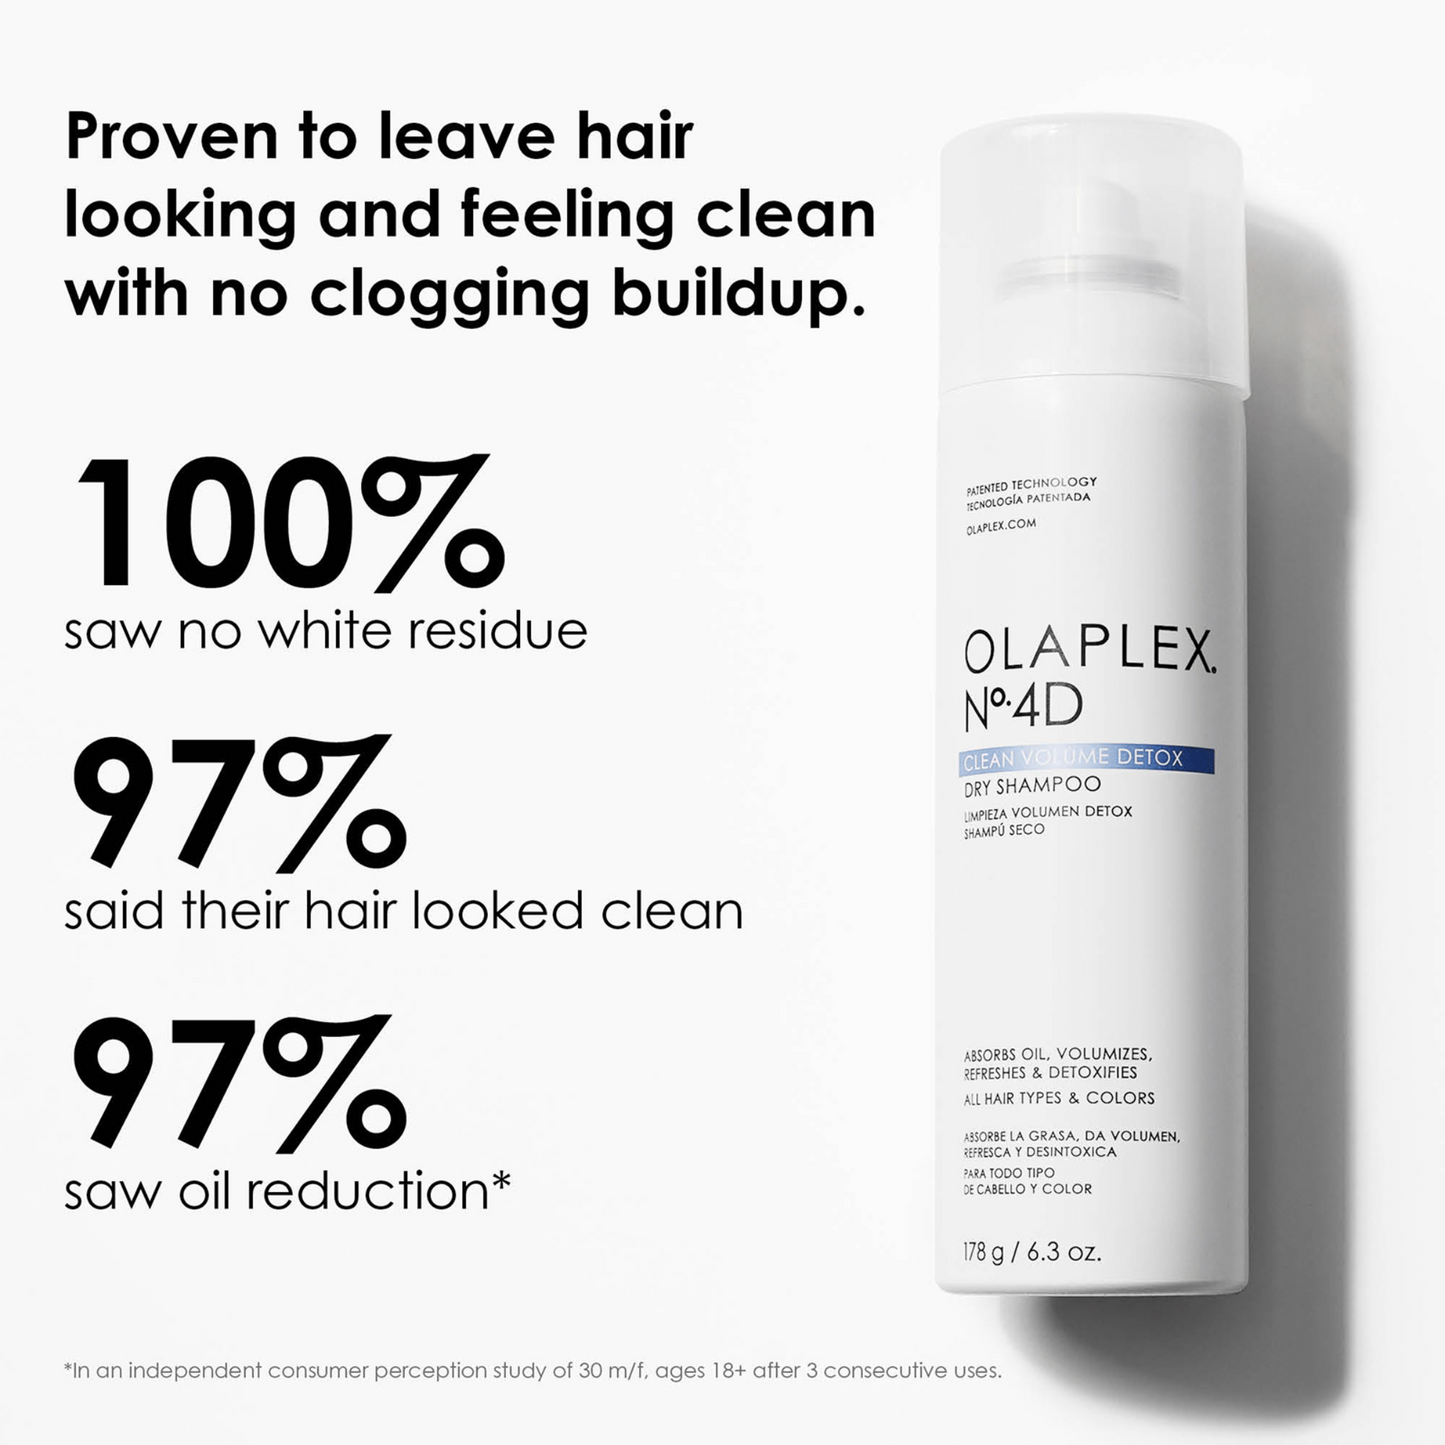 Proven to leave hair looking and feeling clean with no clogging buildup: 100% saw no white residue. 97% said their hair looked clean. 97% saw a reduction of oil*.